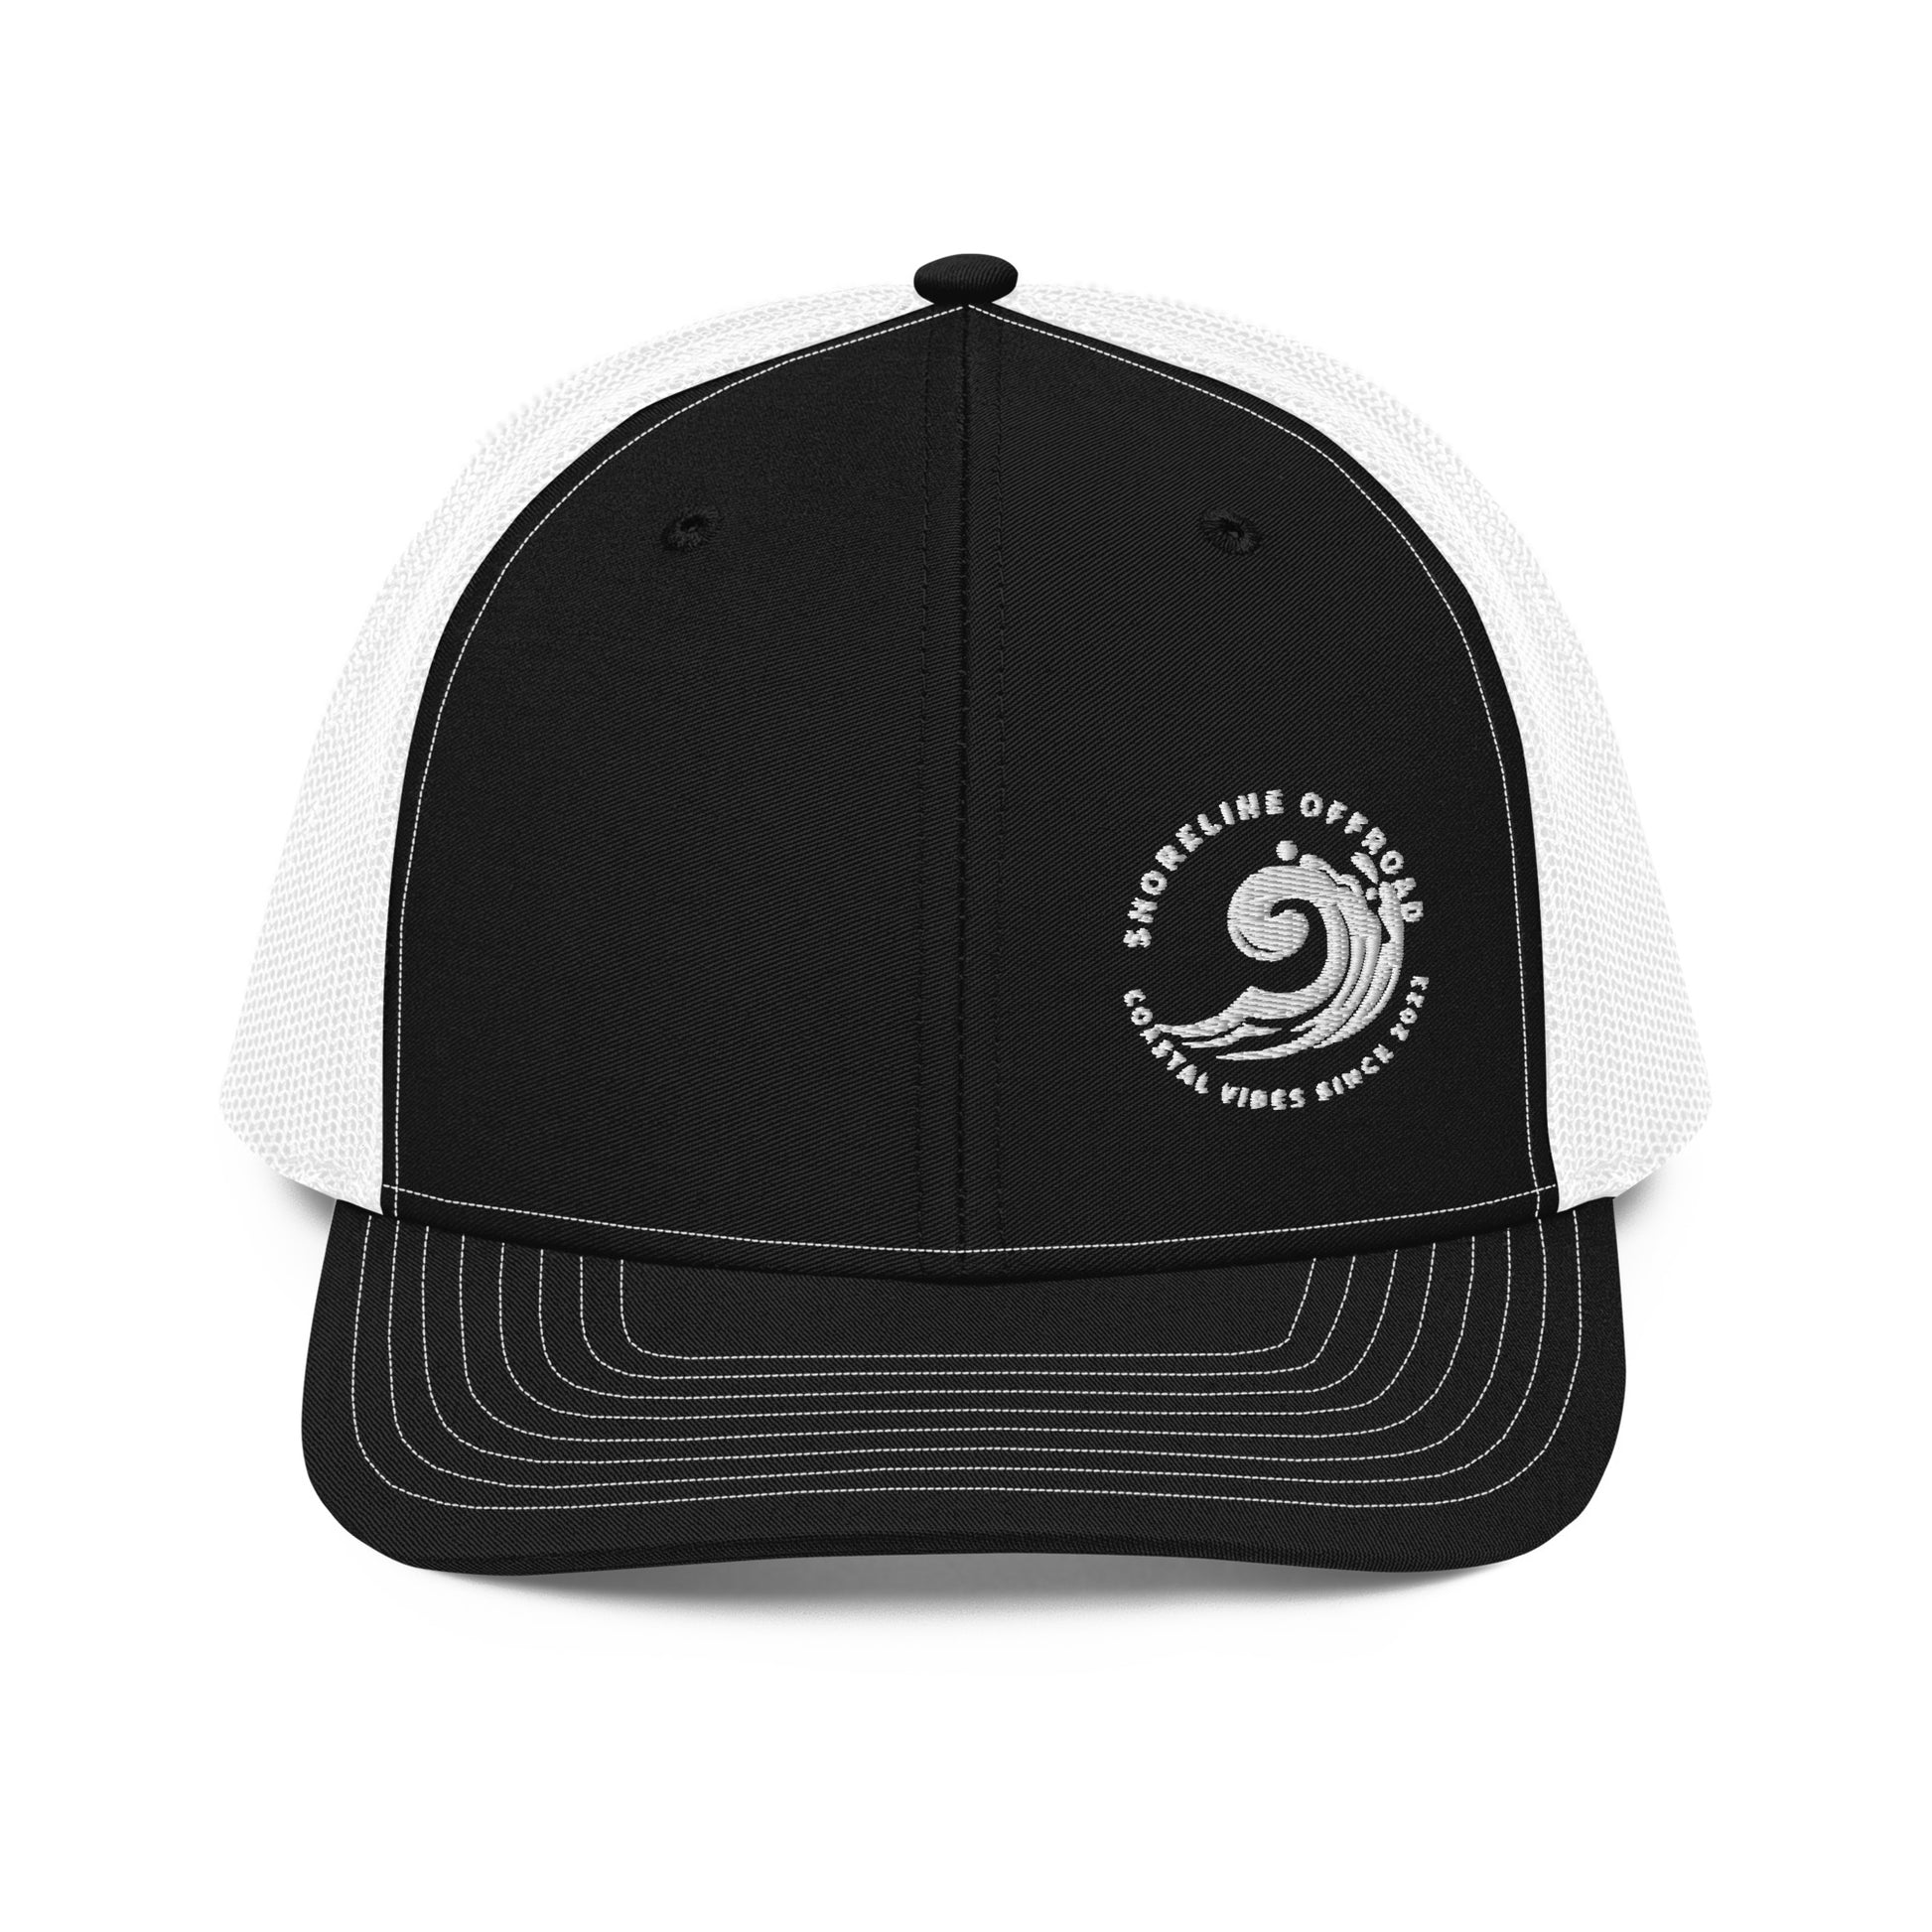 a black and white trucker hat with a white logo